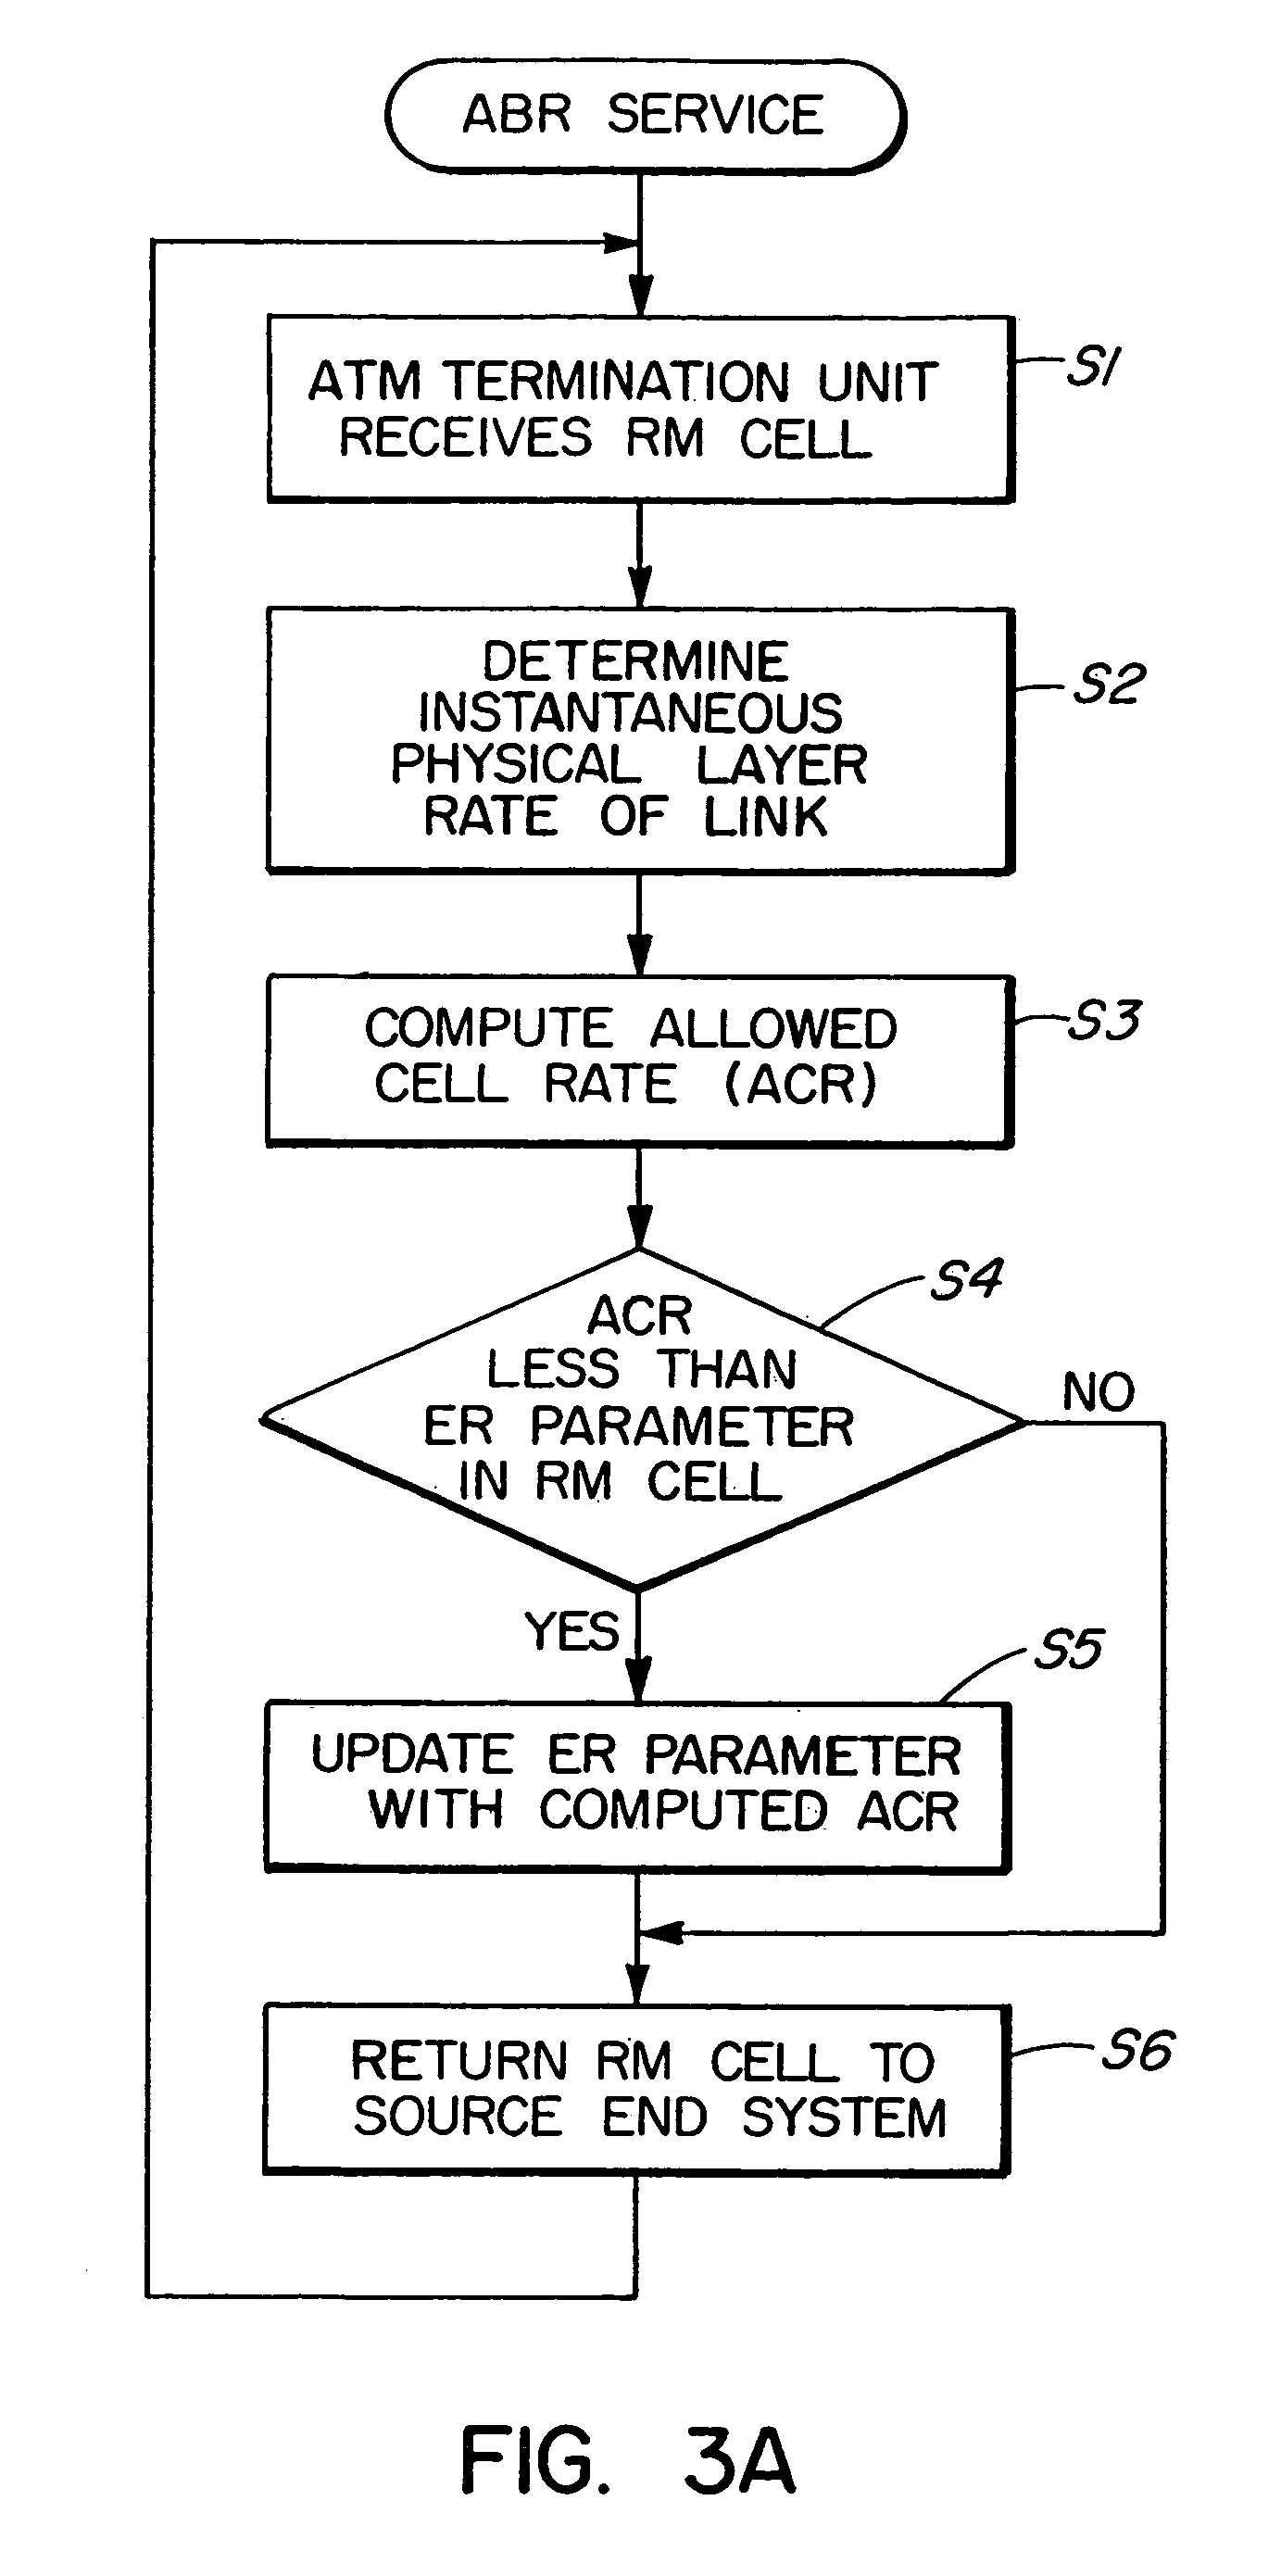 Controlling ATM layer transfer characteristics based on physical layer dynamic rate adaptation